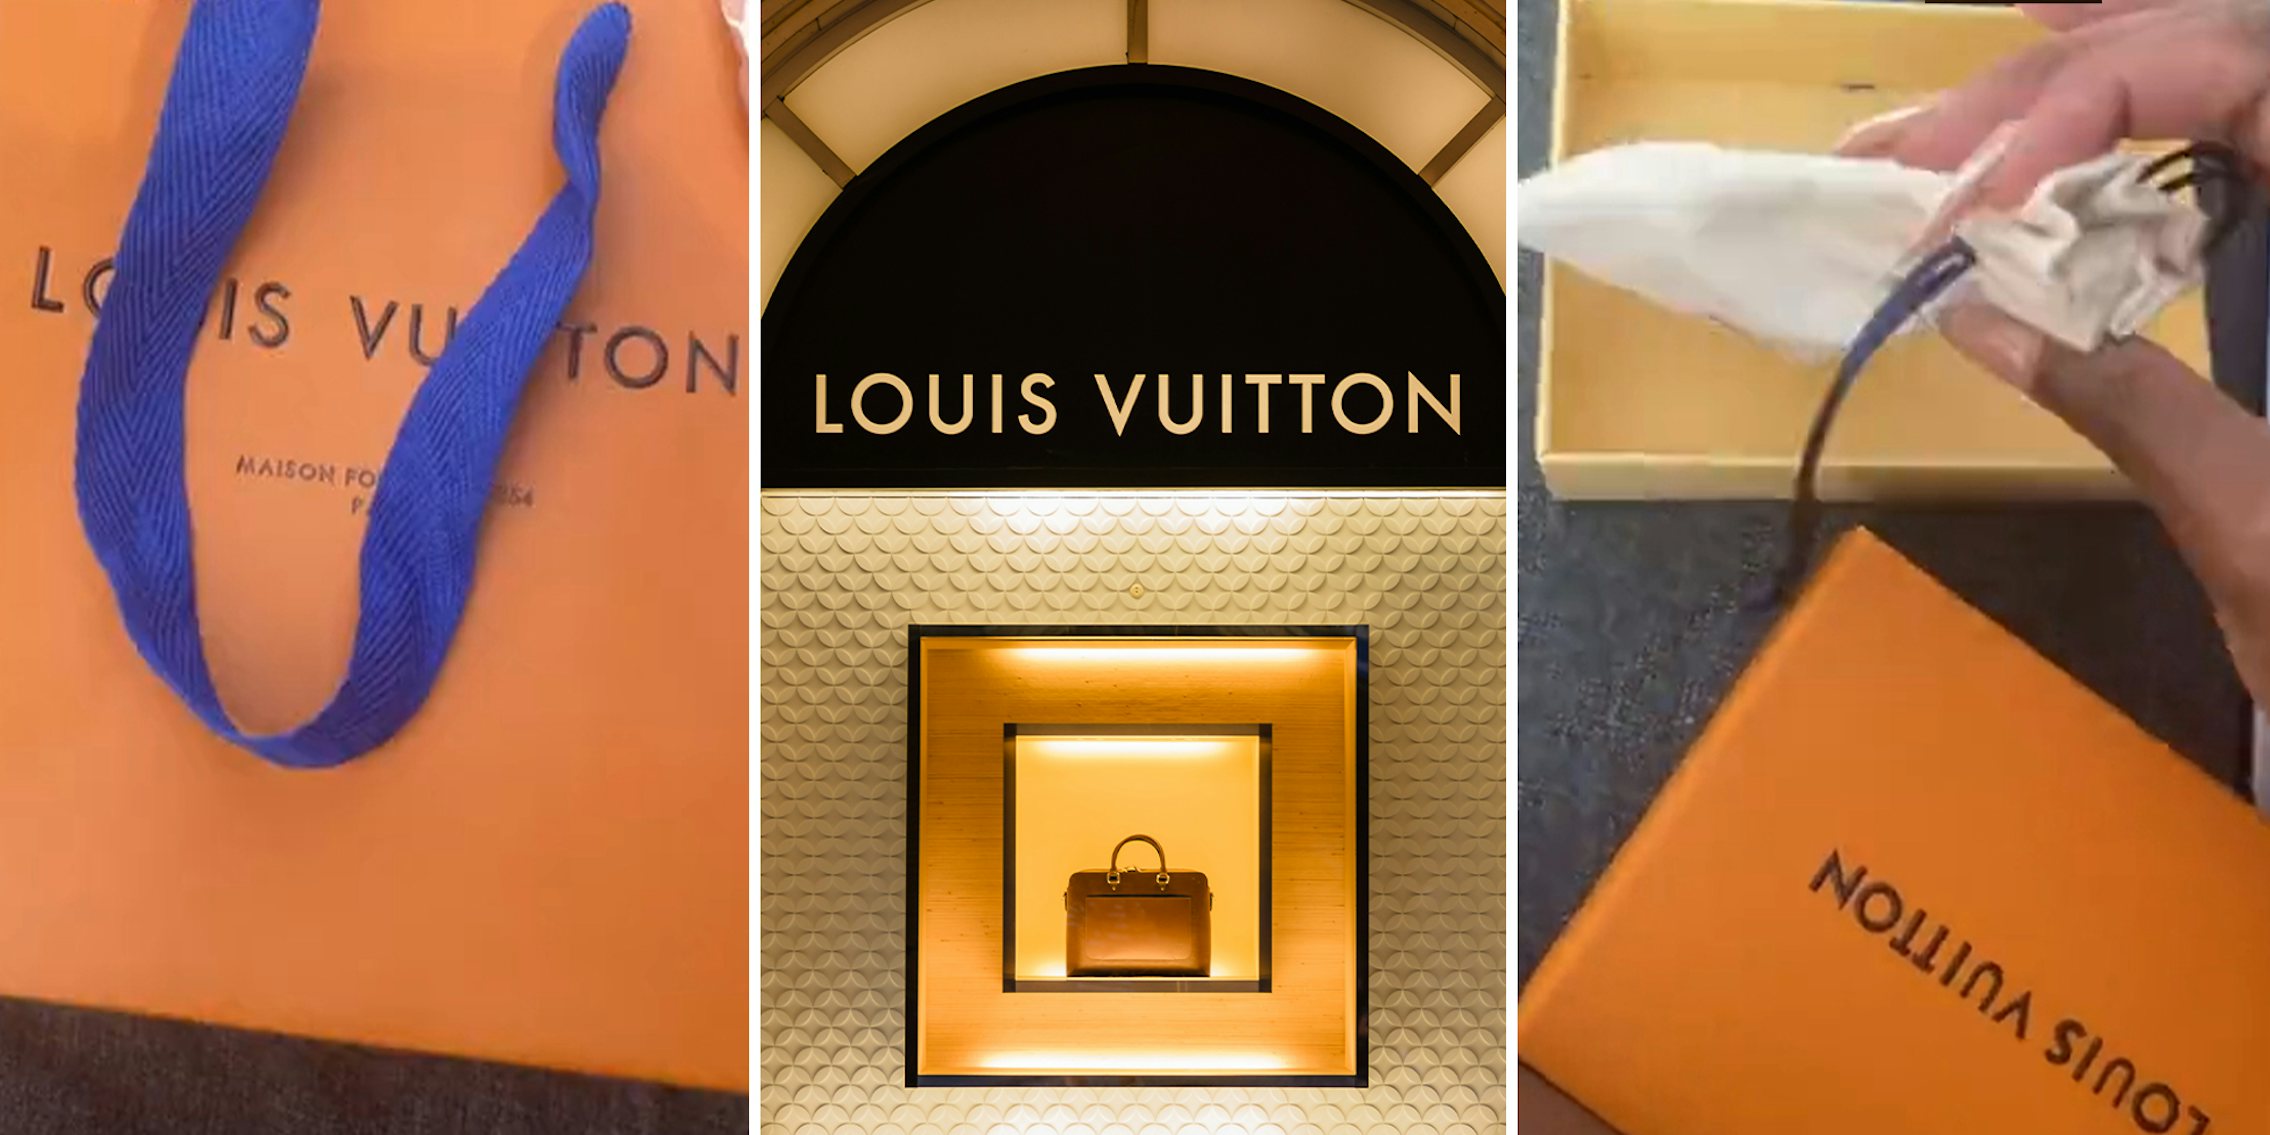 We bought Champagnepaki a birthday gift from Louis Vuitton